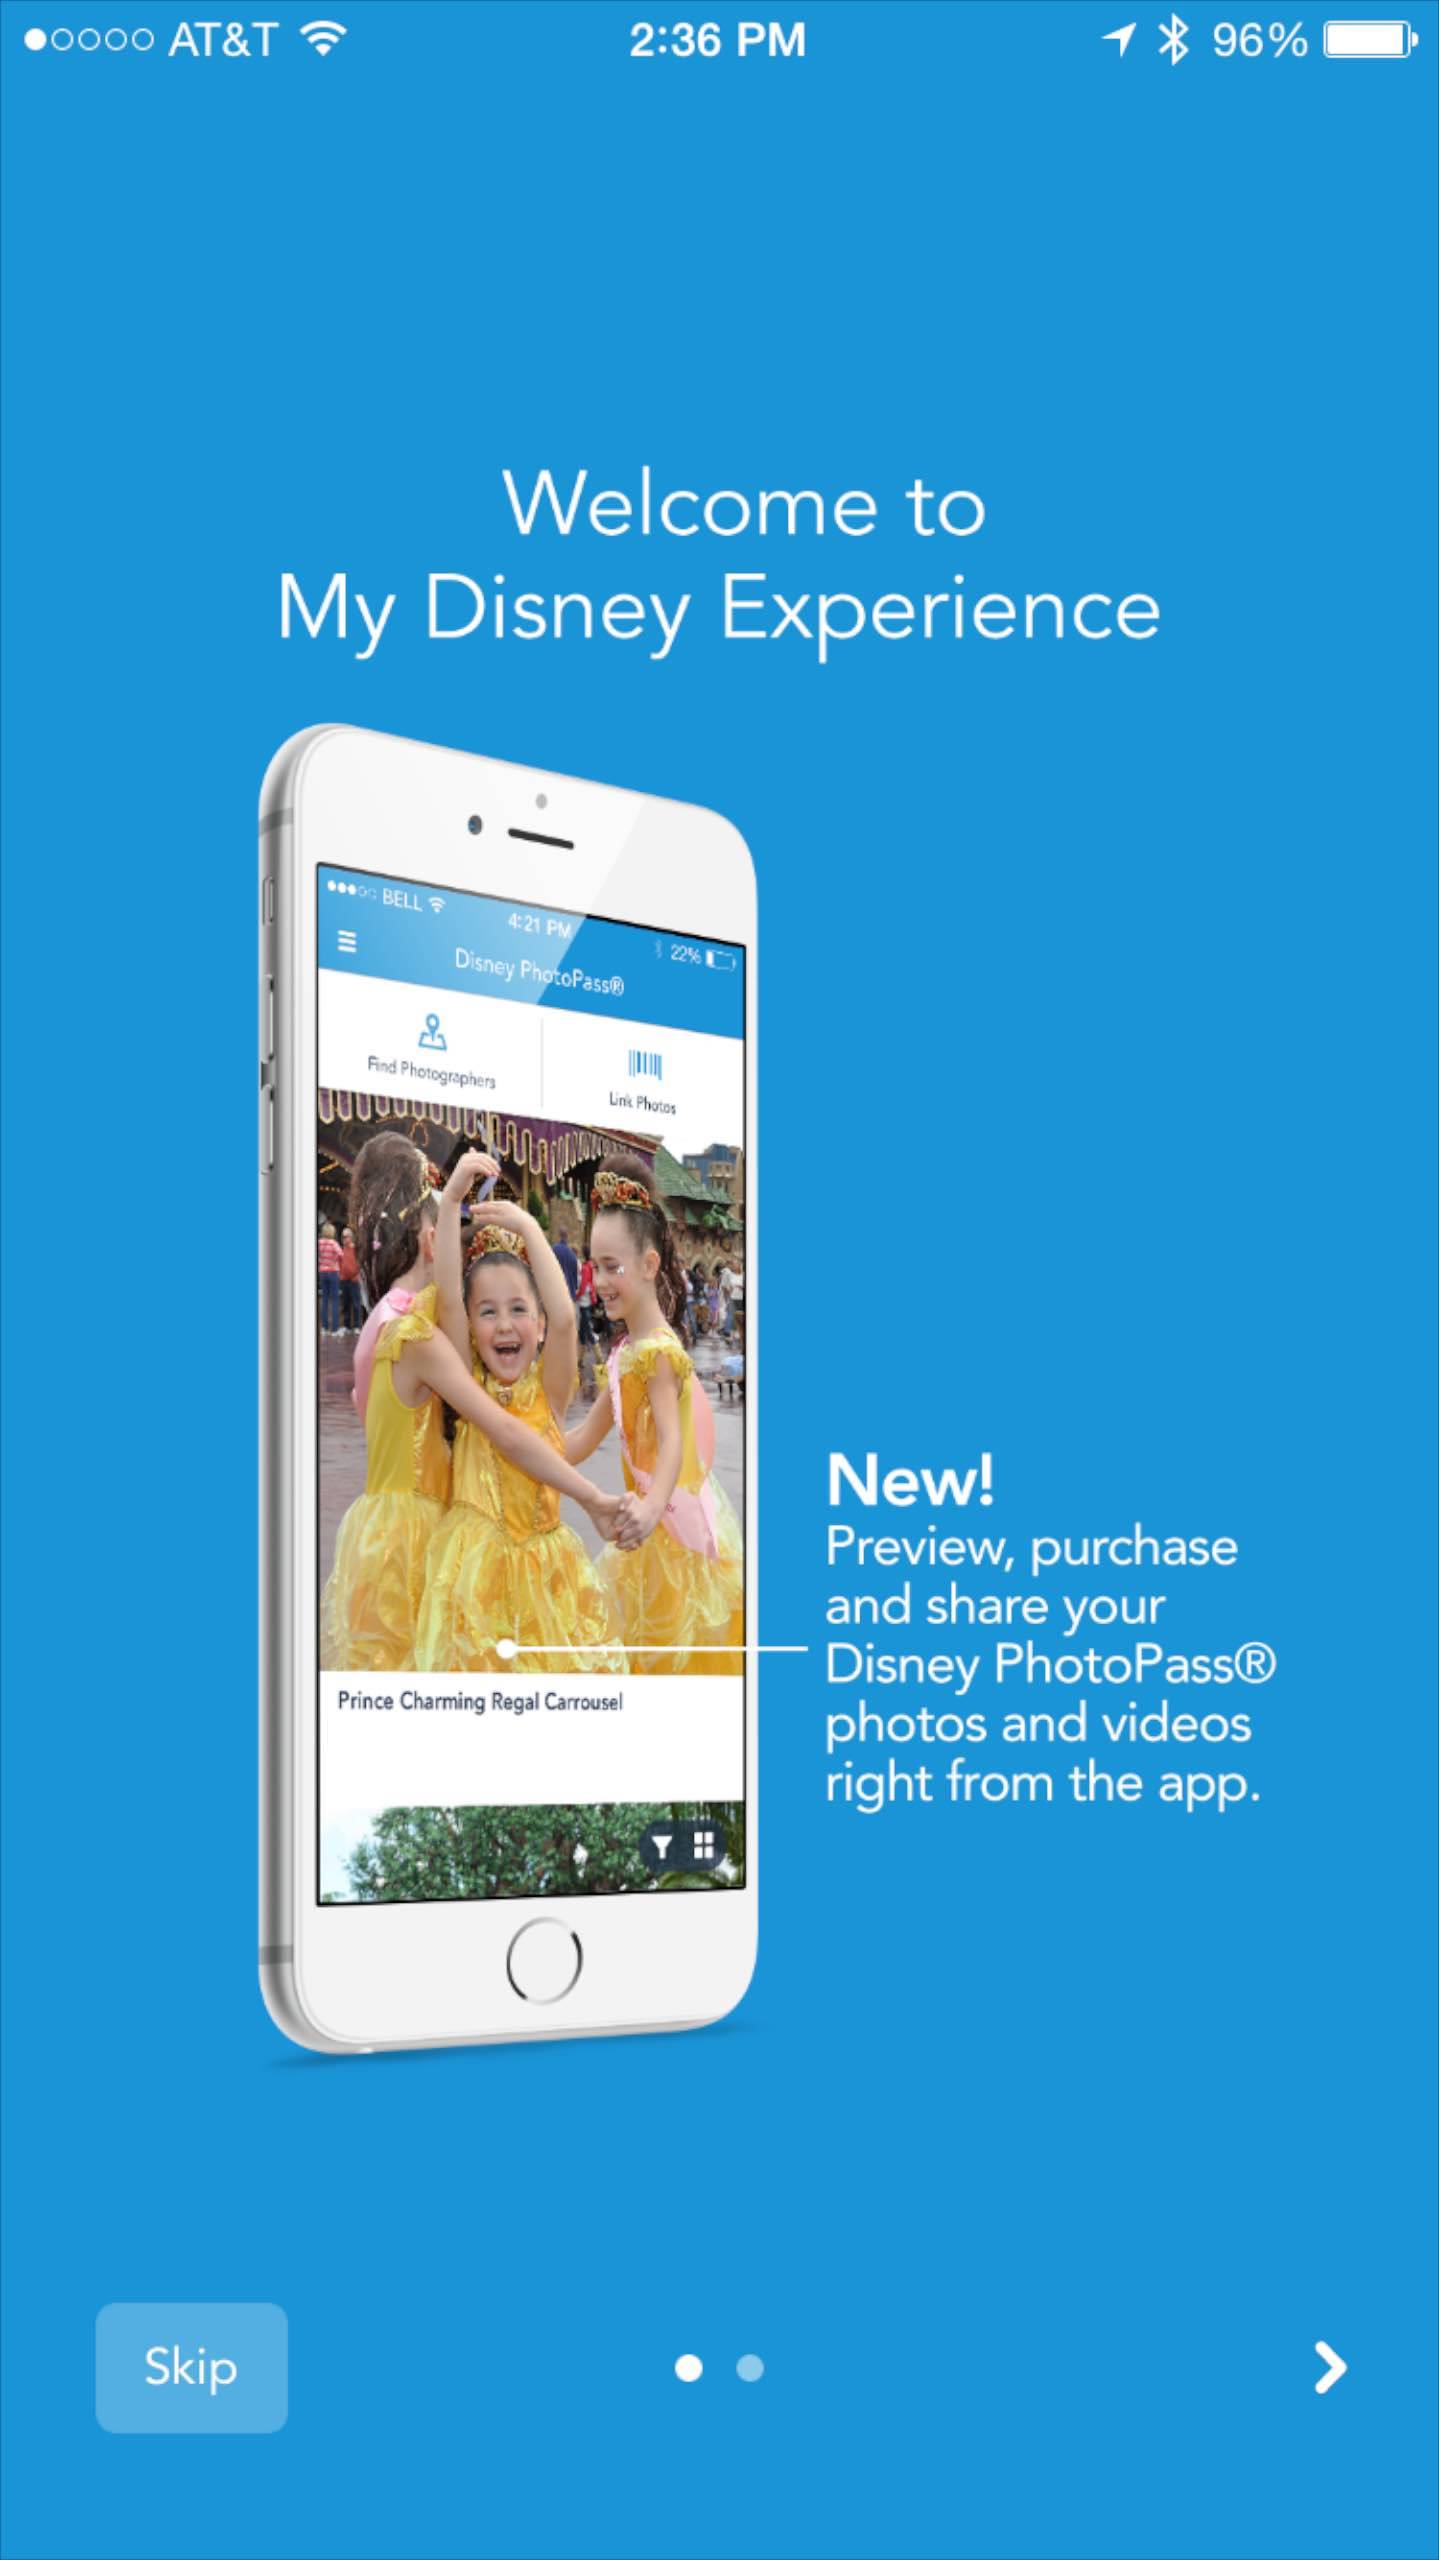 'My Disney Experience' app updated to include PhotoPass previews